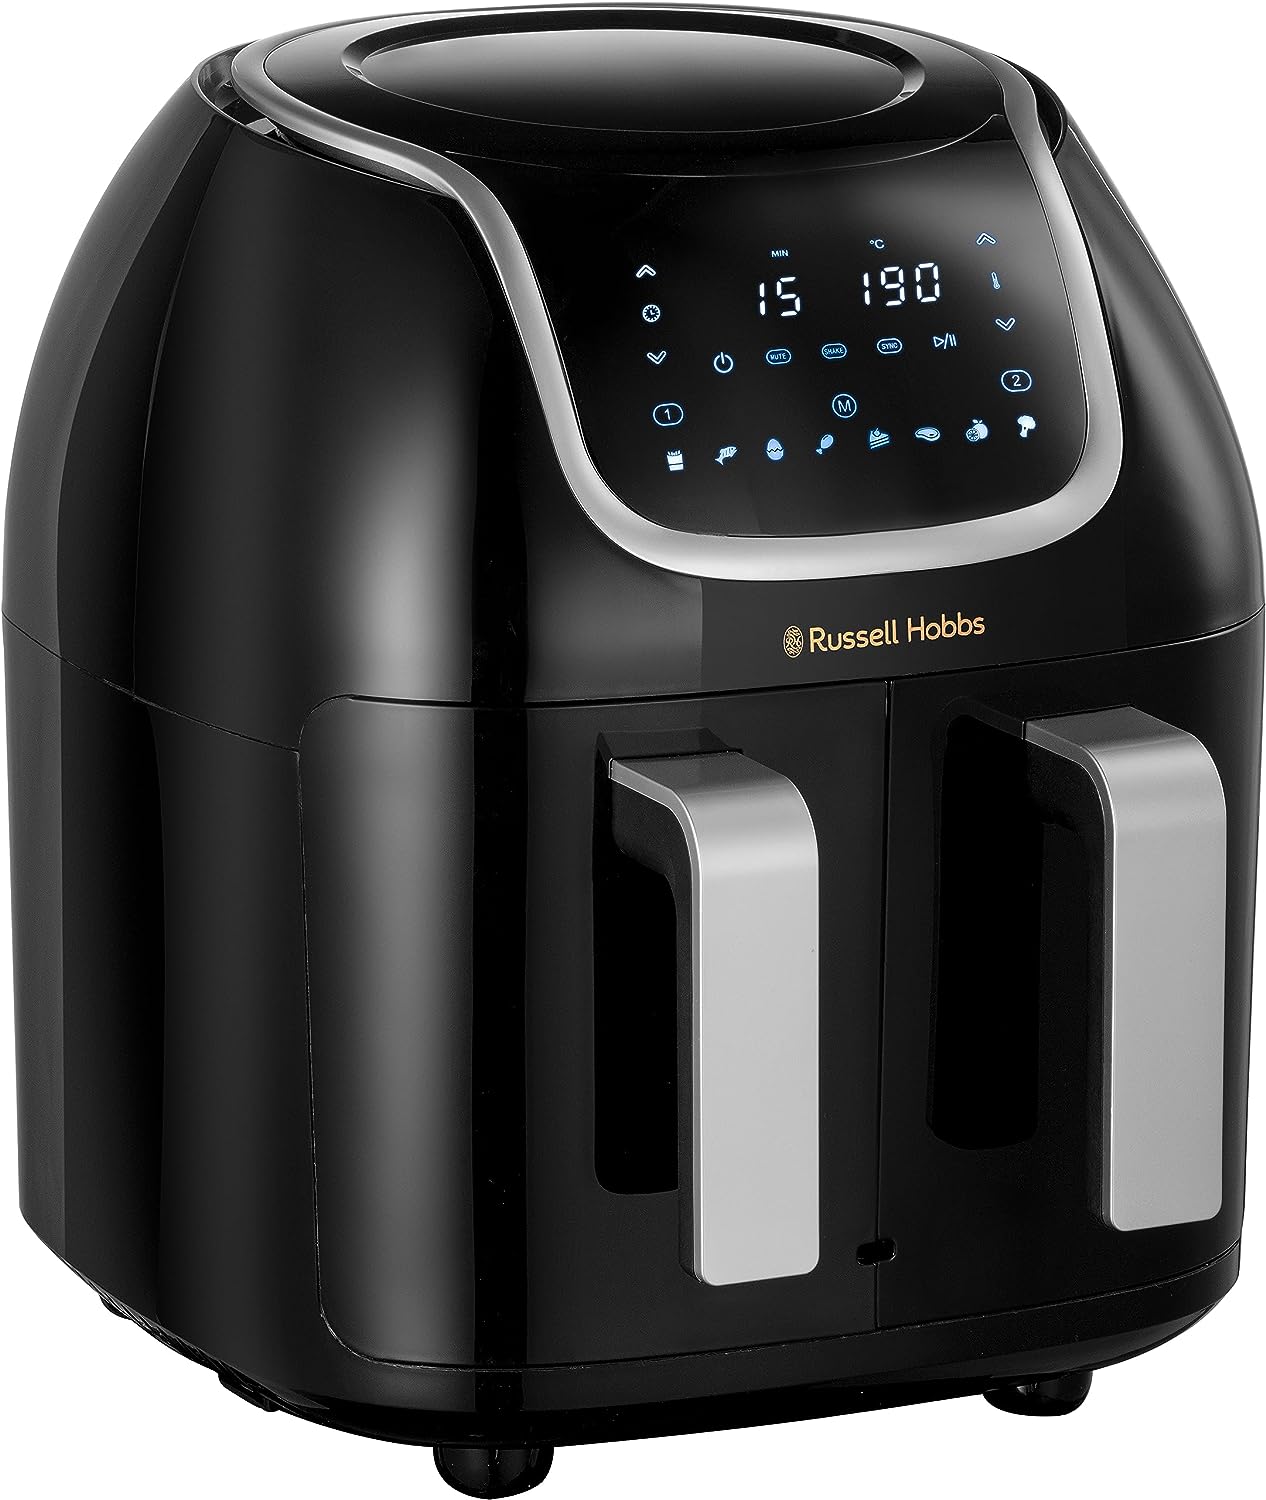 Russell Hobbs Double Chamber Hot Air Fryer [2 Compartments: 4.25 L or a Basket 8.5 L] AirFryer SatisFry Snappi (8 Programmes, Dishwasher Safe, Touch Screen, Fryer without Oil) Dual Basket 27290-56